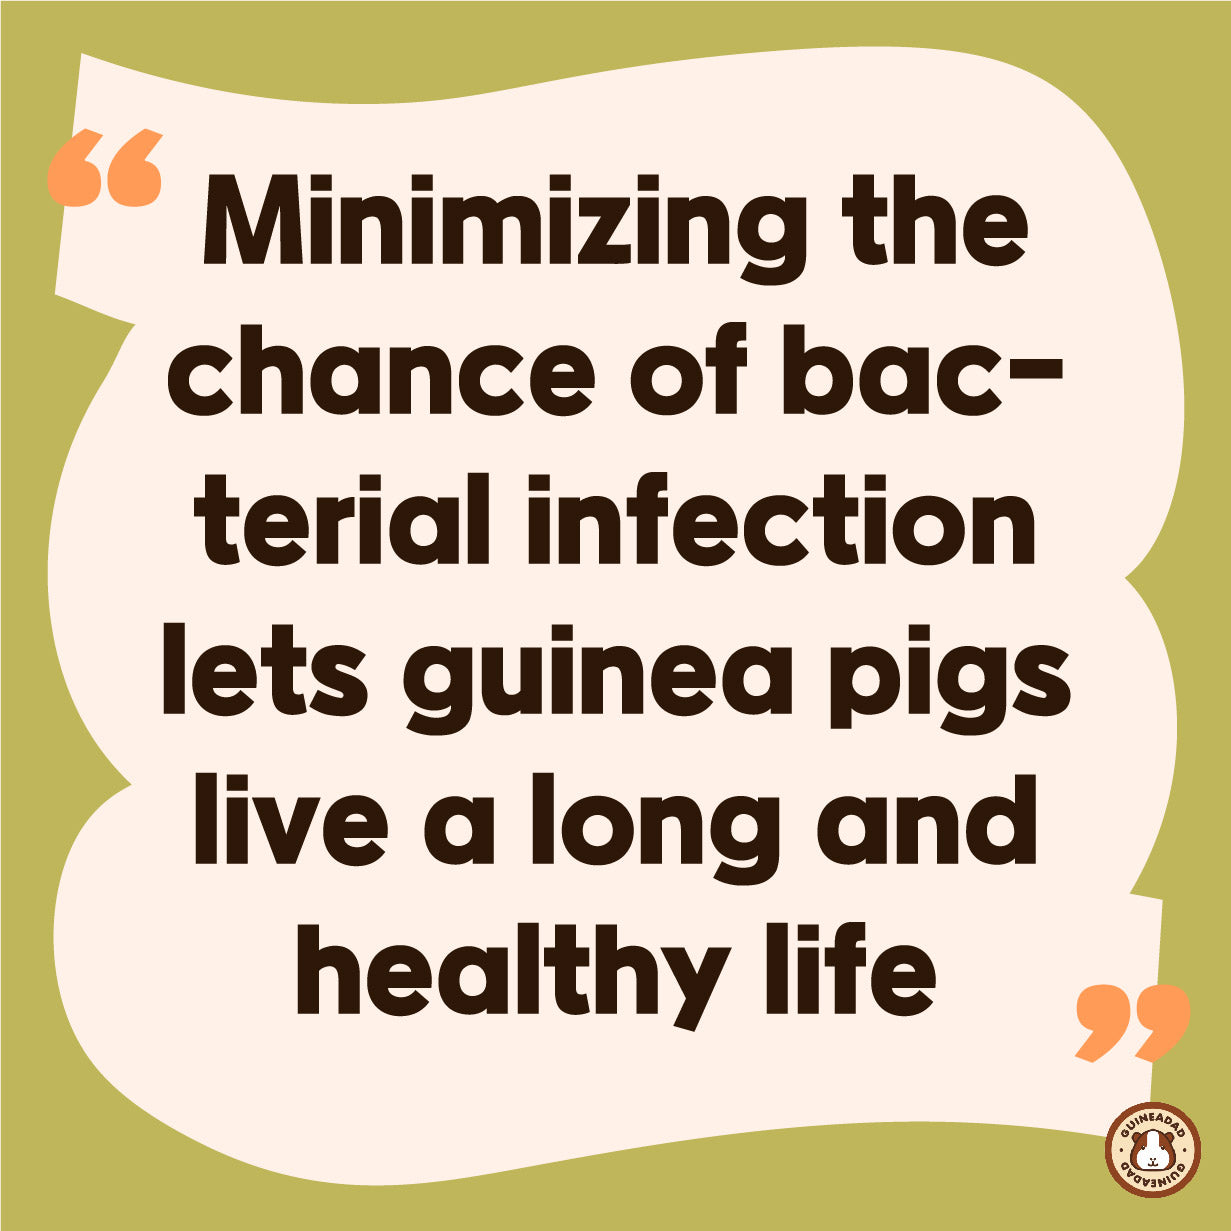 Minimizing the chance of bacterial infection lets guinea pigs live a long and healthy life